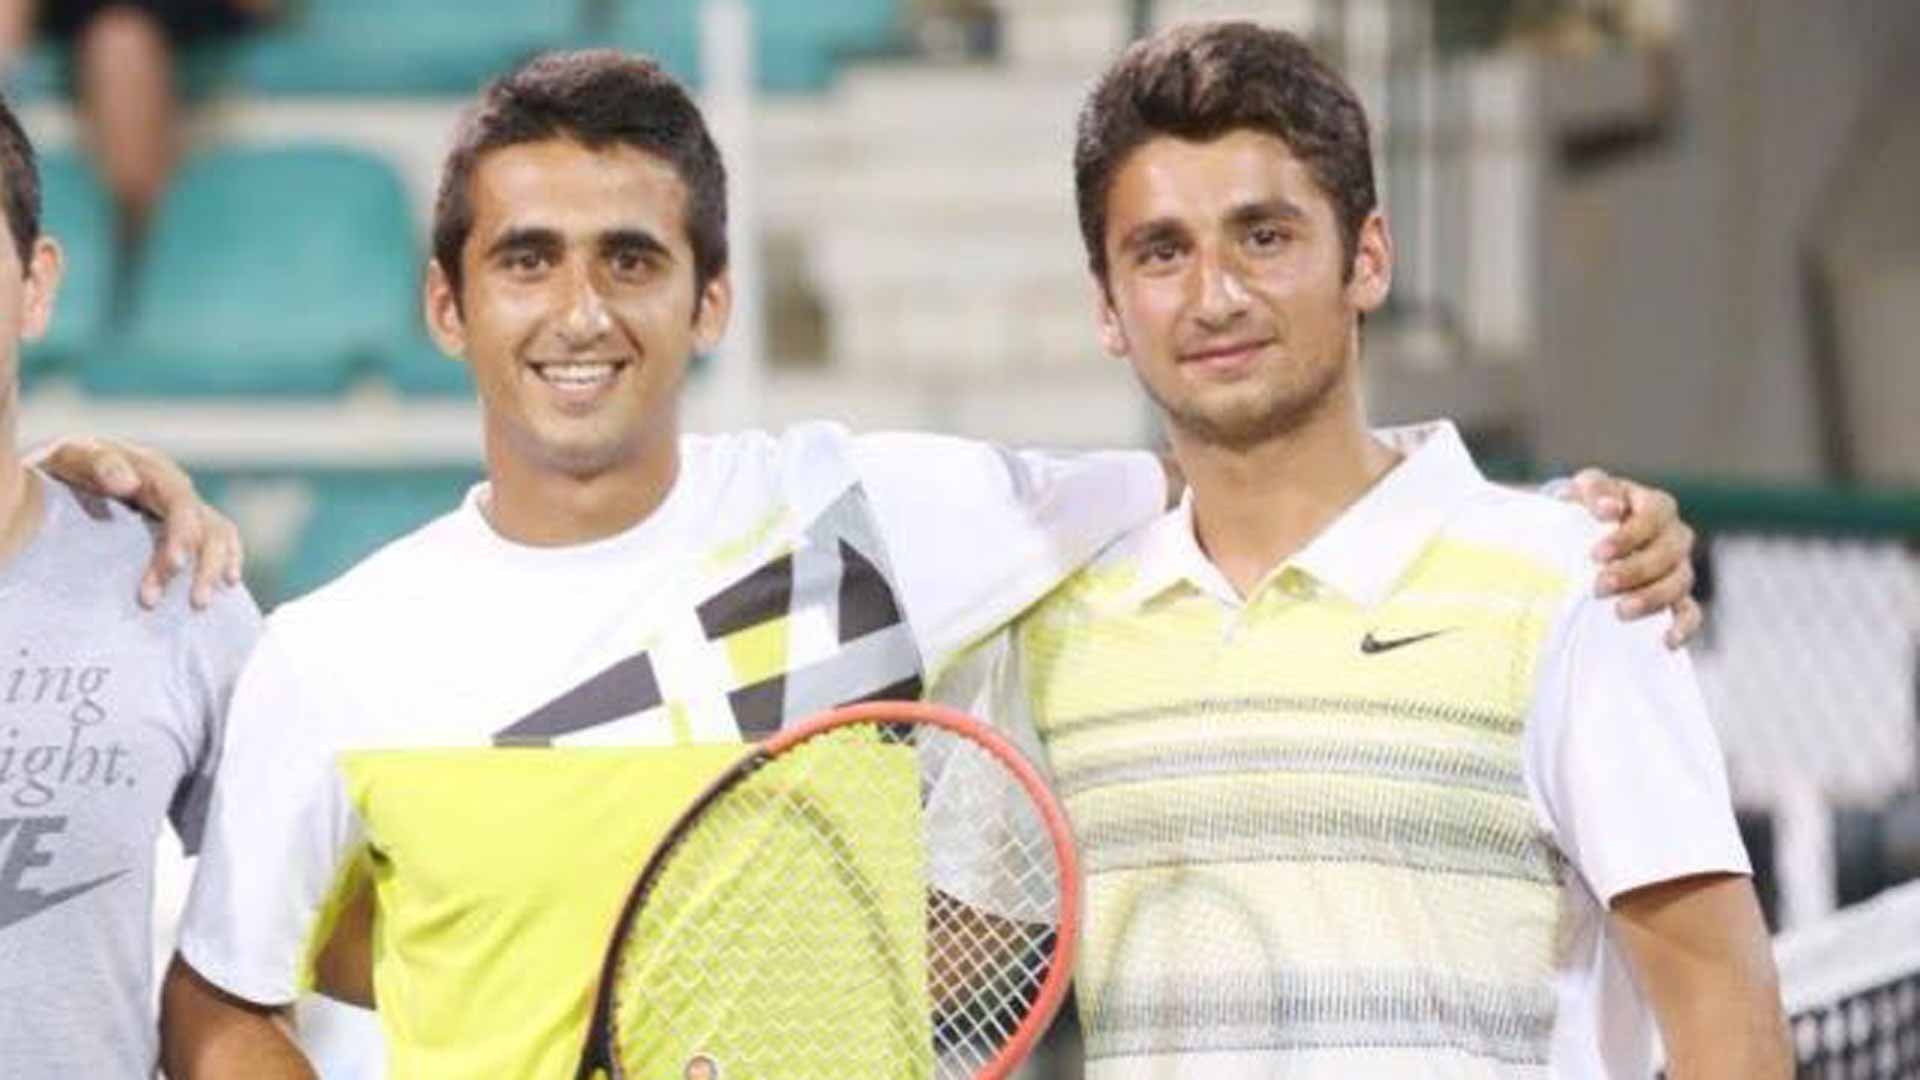 Amer (left) and <a href='https://www.atptour.com/en/players/hazem-naw/n0bk/overview'>Hazem Naw</a> play doubles in Beirut, Lebanon.